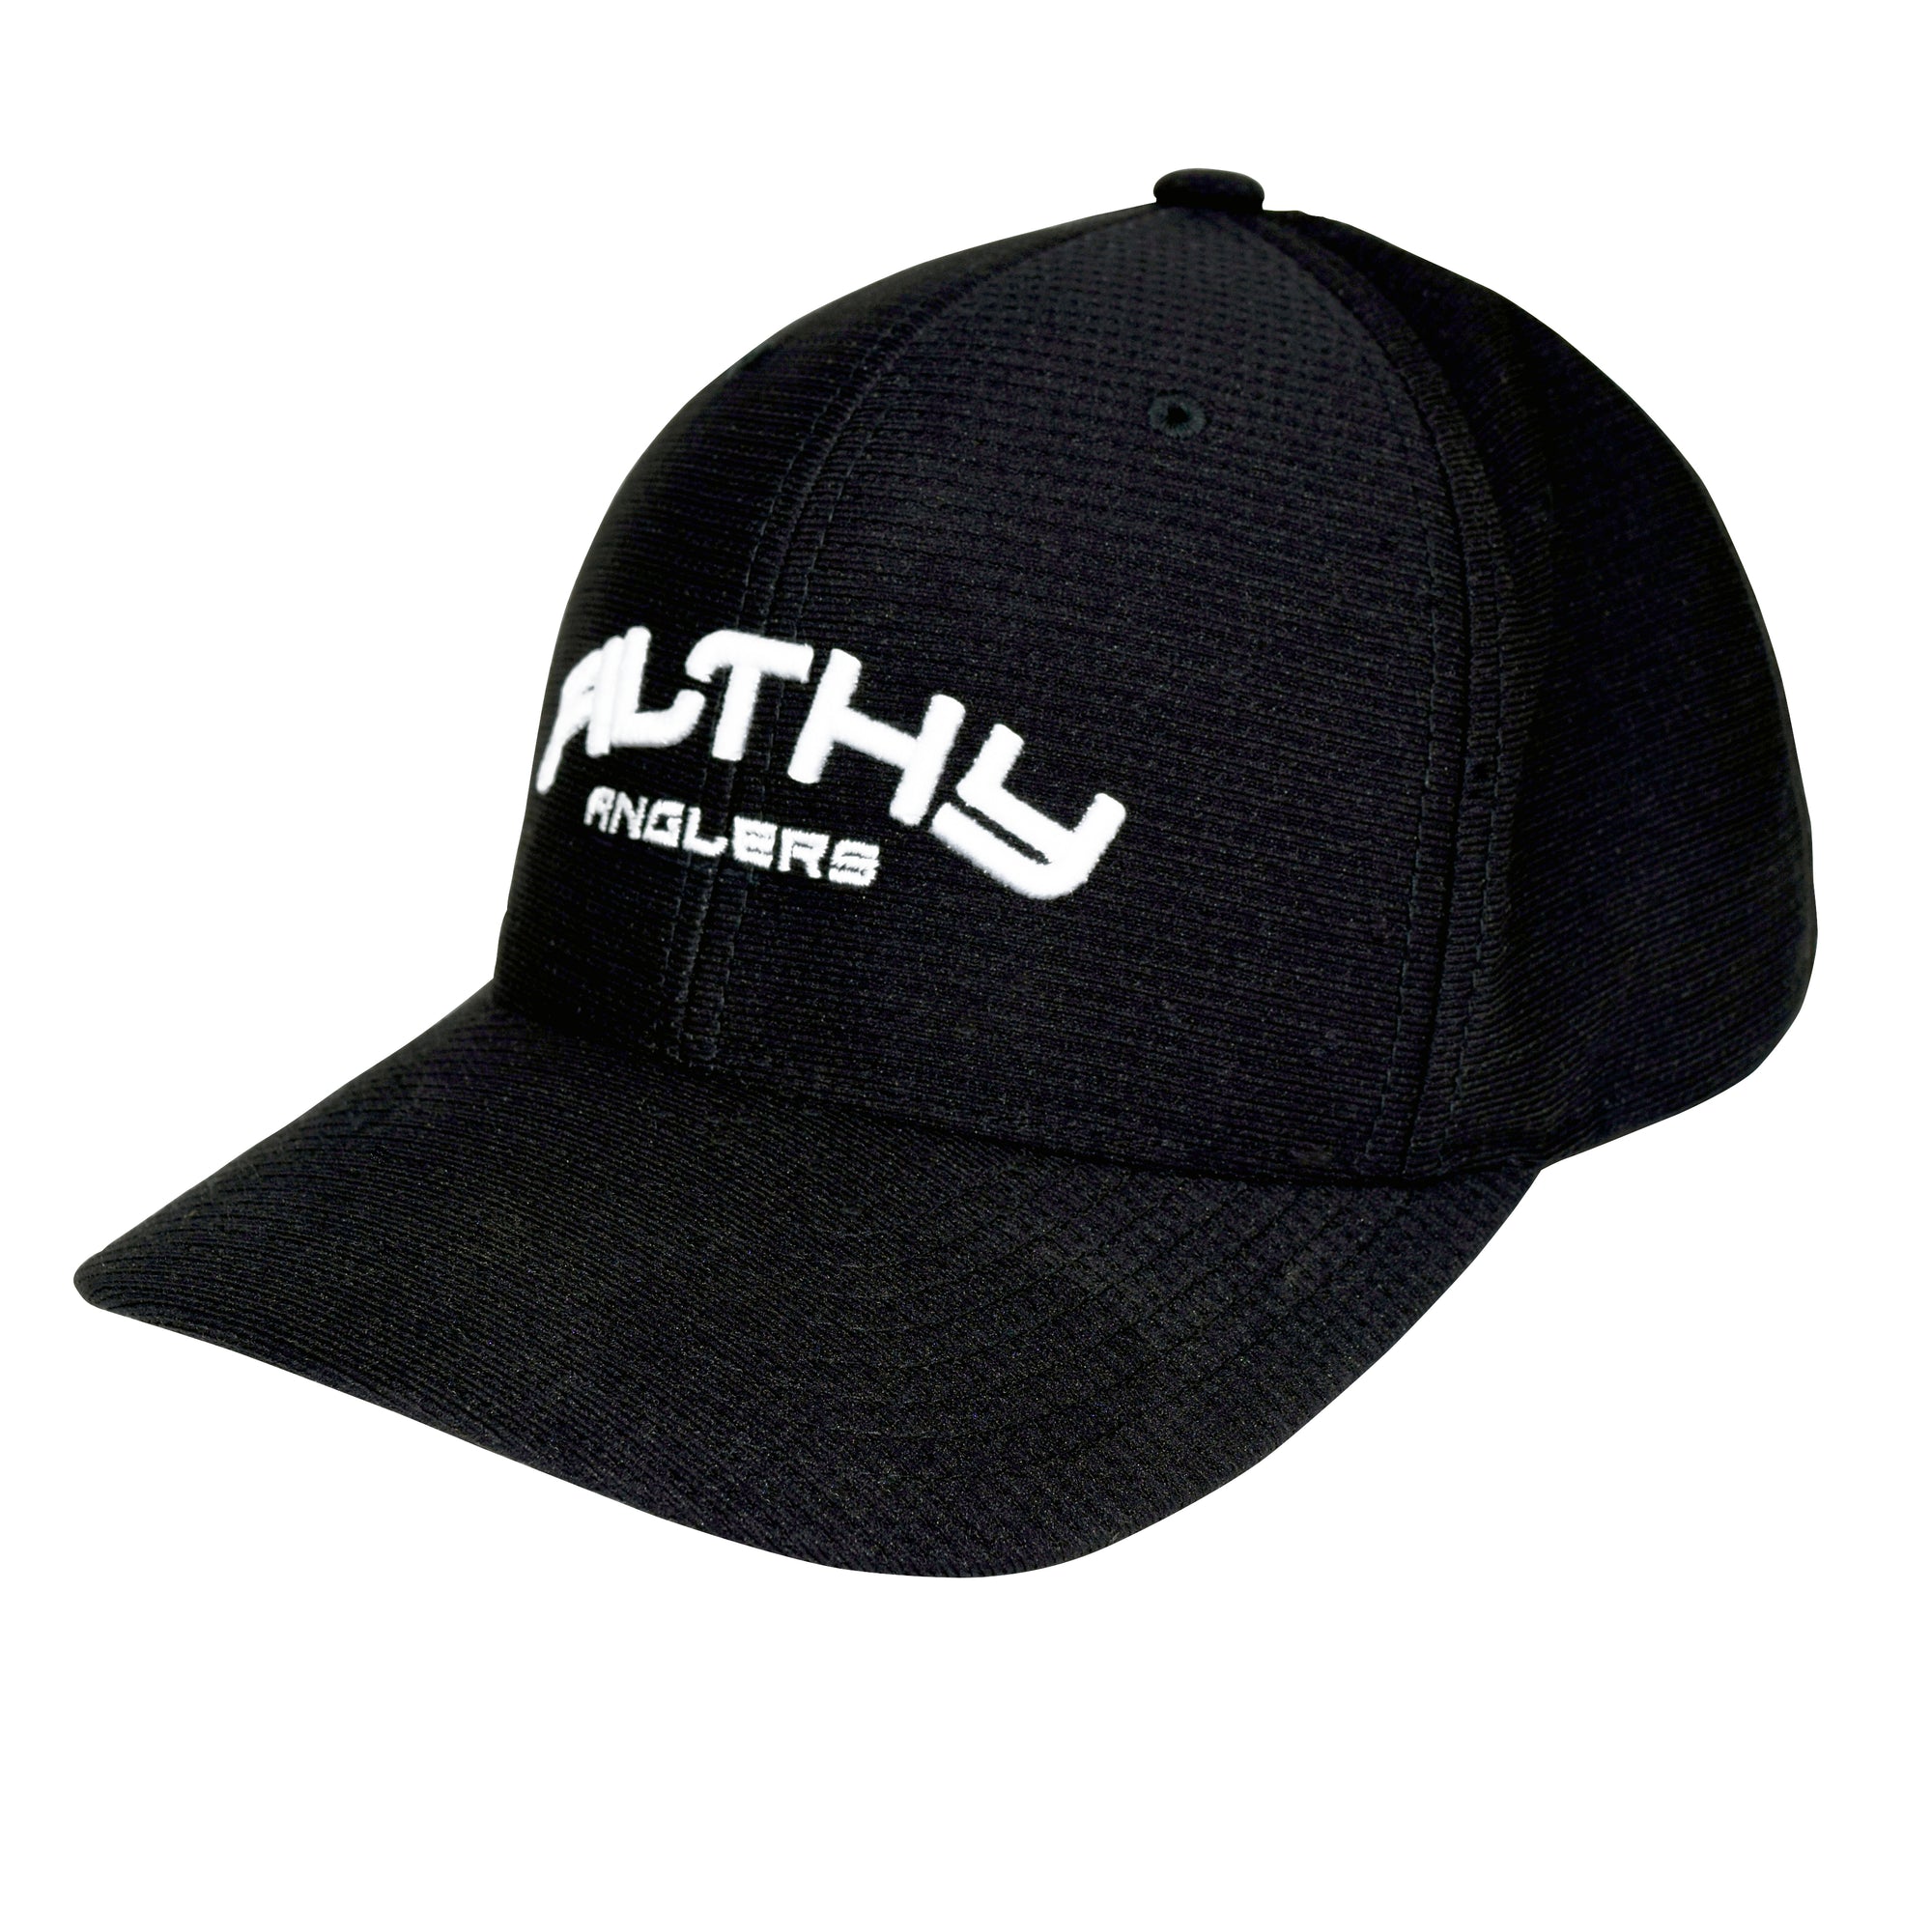 Flexfit Hat, Performance Quick-Dri Fabric - Filthy Anglers